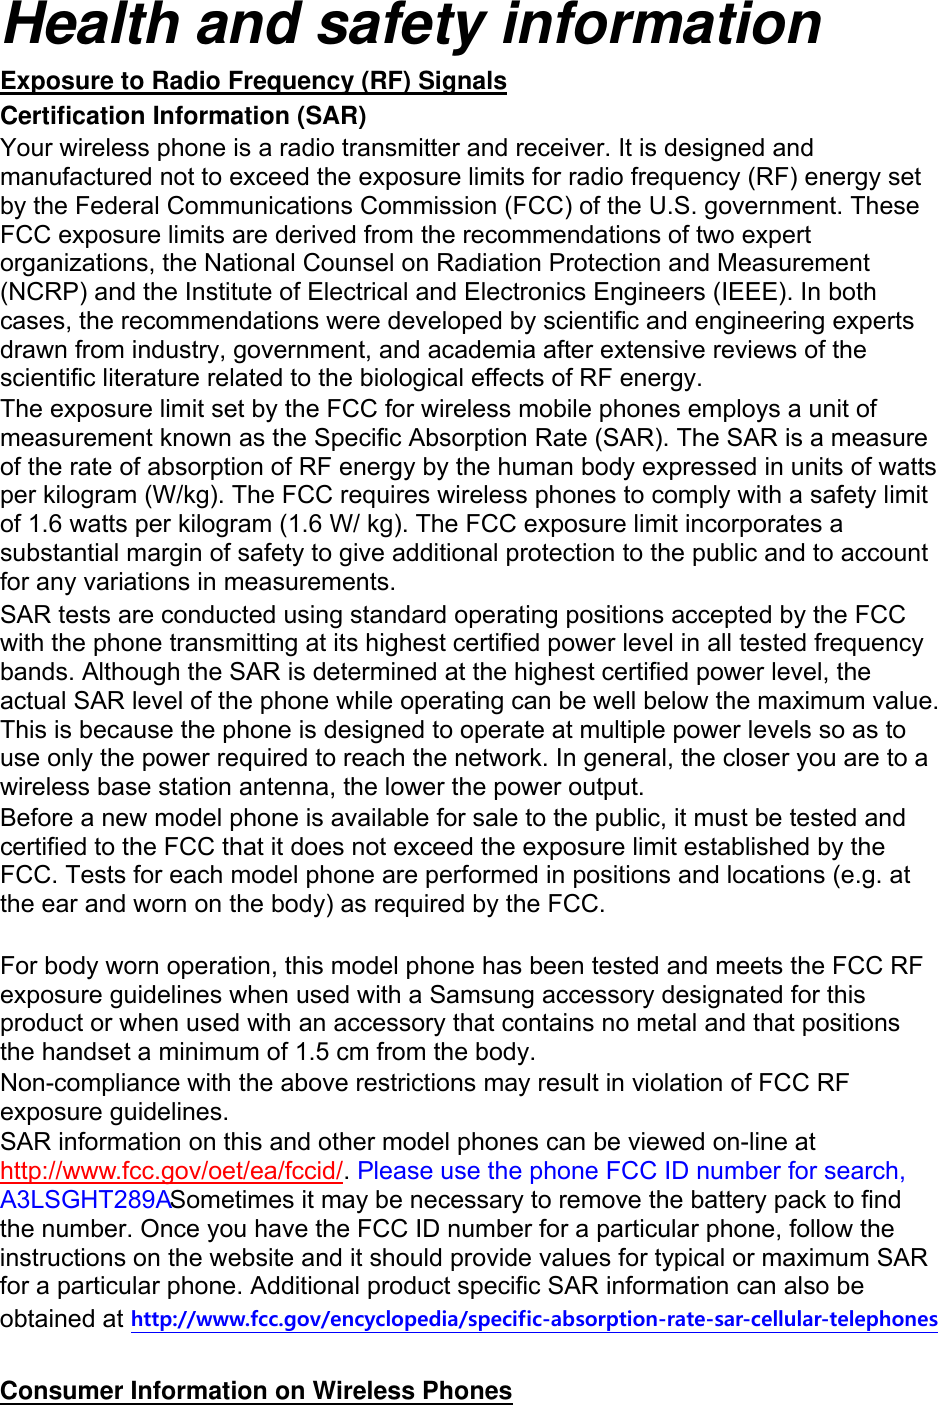 Health and safety information Exposure to Radio Frequency (RF) Signals Certification Information (SAR) Your wireless phone is a radio transmitter and receiver. It is designed and manufactured not to exceed the exposure limits for radio frequency (RF) energy set by the Federal Communications Commission (FCC) of the U.S. government. These FCC exposure limits are derived from the recommendations of two expert organizations, the National Counsel on Radiation Protection and Measurement (NCRP) and the Institute of Electrical and Electronics Engineers (IEEE). In both cases, the recommendations were developed by scientific and engineering experts drawn from industry, government, and academia after extensive reviews of the scientific literature related to the biological effects of RF energy. The exposure limit set by the FCC for wireless mobile phones employs a unit of measurement known as the Specific Absorption Rate (SAR). The SAR is a measure of the rate of absorption of RF energy by the human body expressed in units of watts per kilogram (W/kg). The FCC requires wireless phones to comply with a safety limit of 1.6 watts per kilogram (1.6 W/ kg). The FCC exposure limit incorporates a substantial margin of safety to give additional protection to the public and to account for any variations in measurements. SAR tests are conducted using standard operating positions accepted by the FCC with the phone transmitting at its highest certified power level in all tested frequency bands. Although the SAR is determined at the highest certified power level, the actual SAR level of the phone while operating can be well below the maximum value. This is because the phone is designed to operate at multiple power levels so as to use only the power required to reach the network. In general, the closer you are to a wireless base station antenna, the lower the power output. Before a new model phone is available for sale to the public, it must be tested and certified to the FCC that it does not exceed the exposure limit established by the FCC. Tests for each model phone are performed in positions and locations (e.g. at the ear and worn on the body) as required by the FCC.      For body worn operation, this model phone has been tested and meets the FCC RF exposure guidelines when used with a Samsung accessory designated for this product or when used with an accessory that contains no metal and that positions the handset a minimum of 1.5 cm from the body.   Non-compliance with the above restrictions may result in violation of FCC RF exposure guidelines. SAR information on this and other model phones can be viewed on-line at http://www.fcc.gov/oet/ea/fccid/. Please use the phone FCC ID number for search, A3LSGHT289A Sometimes it may be necessary to remove the battery pack to find the number. Once you have the FCC ID number for a particular phone, follow the instructions on the website and it should provide values for typical or maximum SAR for a particular phone. Additional product specific SAR information can also be obtained at http://www.fcc.gov/encyclopedia/specific-absorption-rate-sar-cellular-telephones  Consumer Information on Wireless Phones 